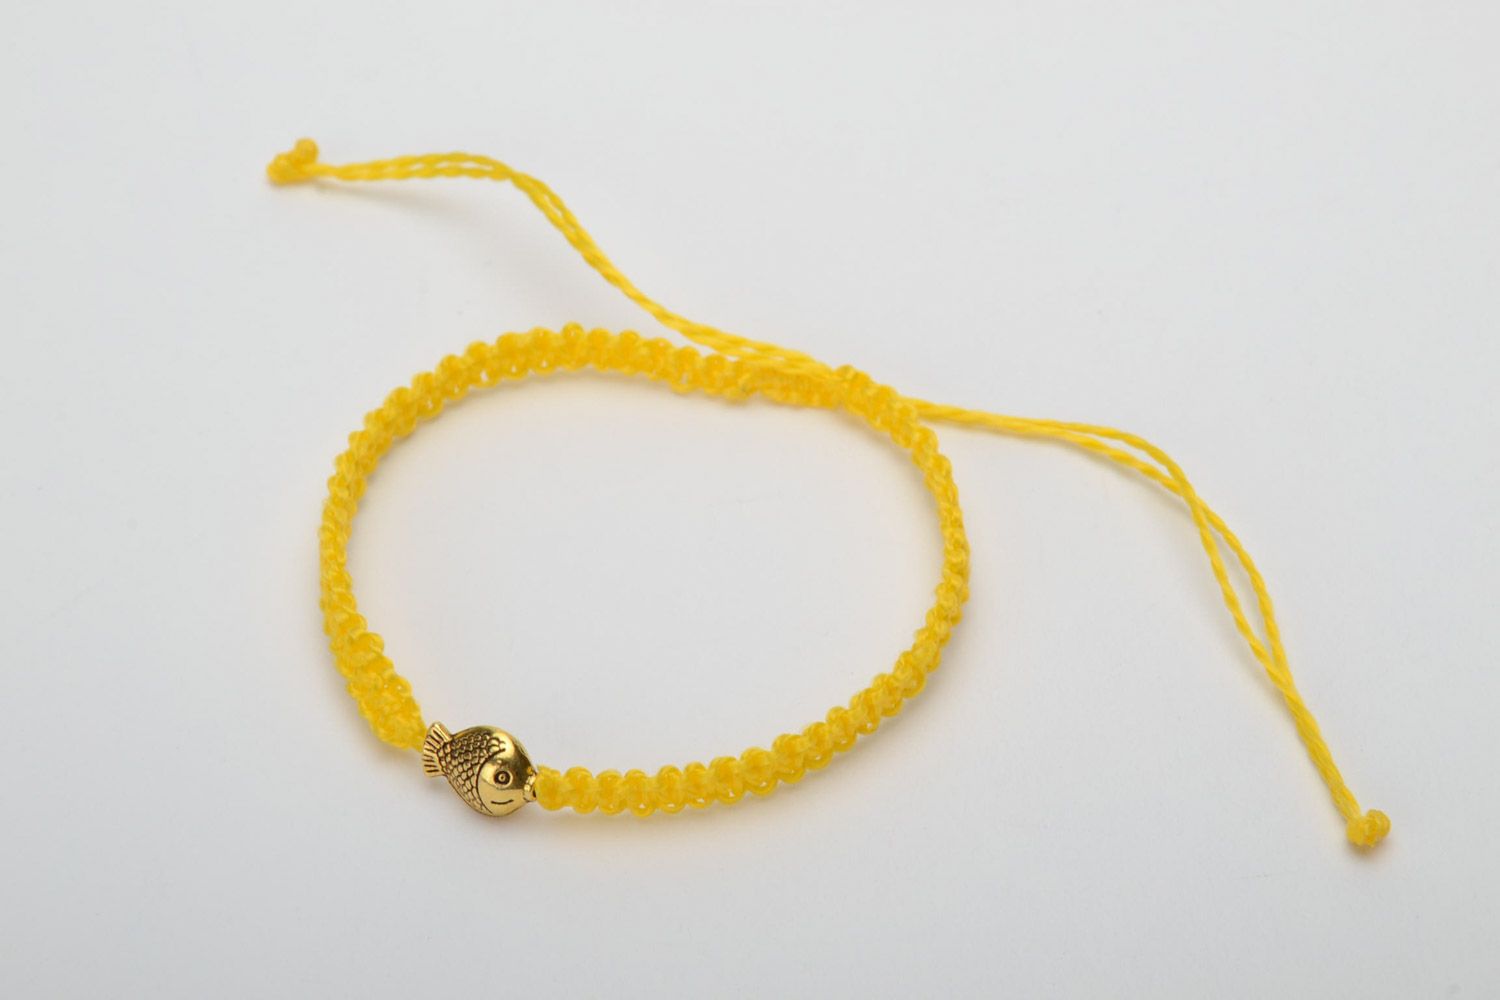 Handmade women's designer macrame woven bracelet of yellow color with metal charm in the shape of fish photo 3